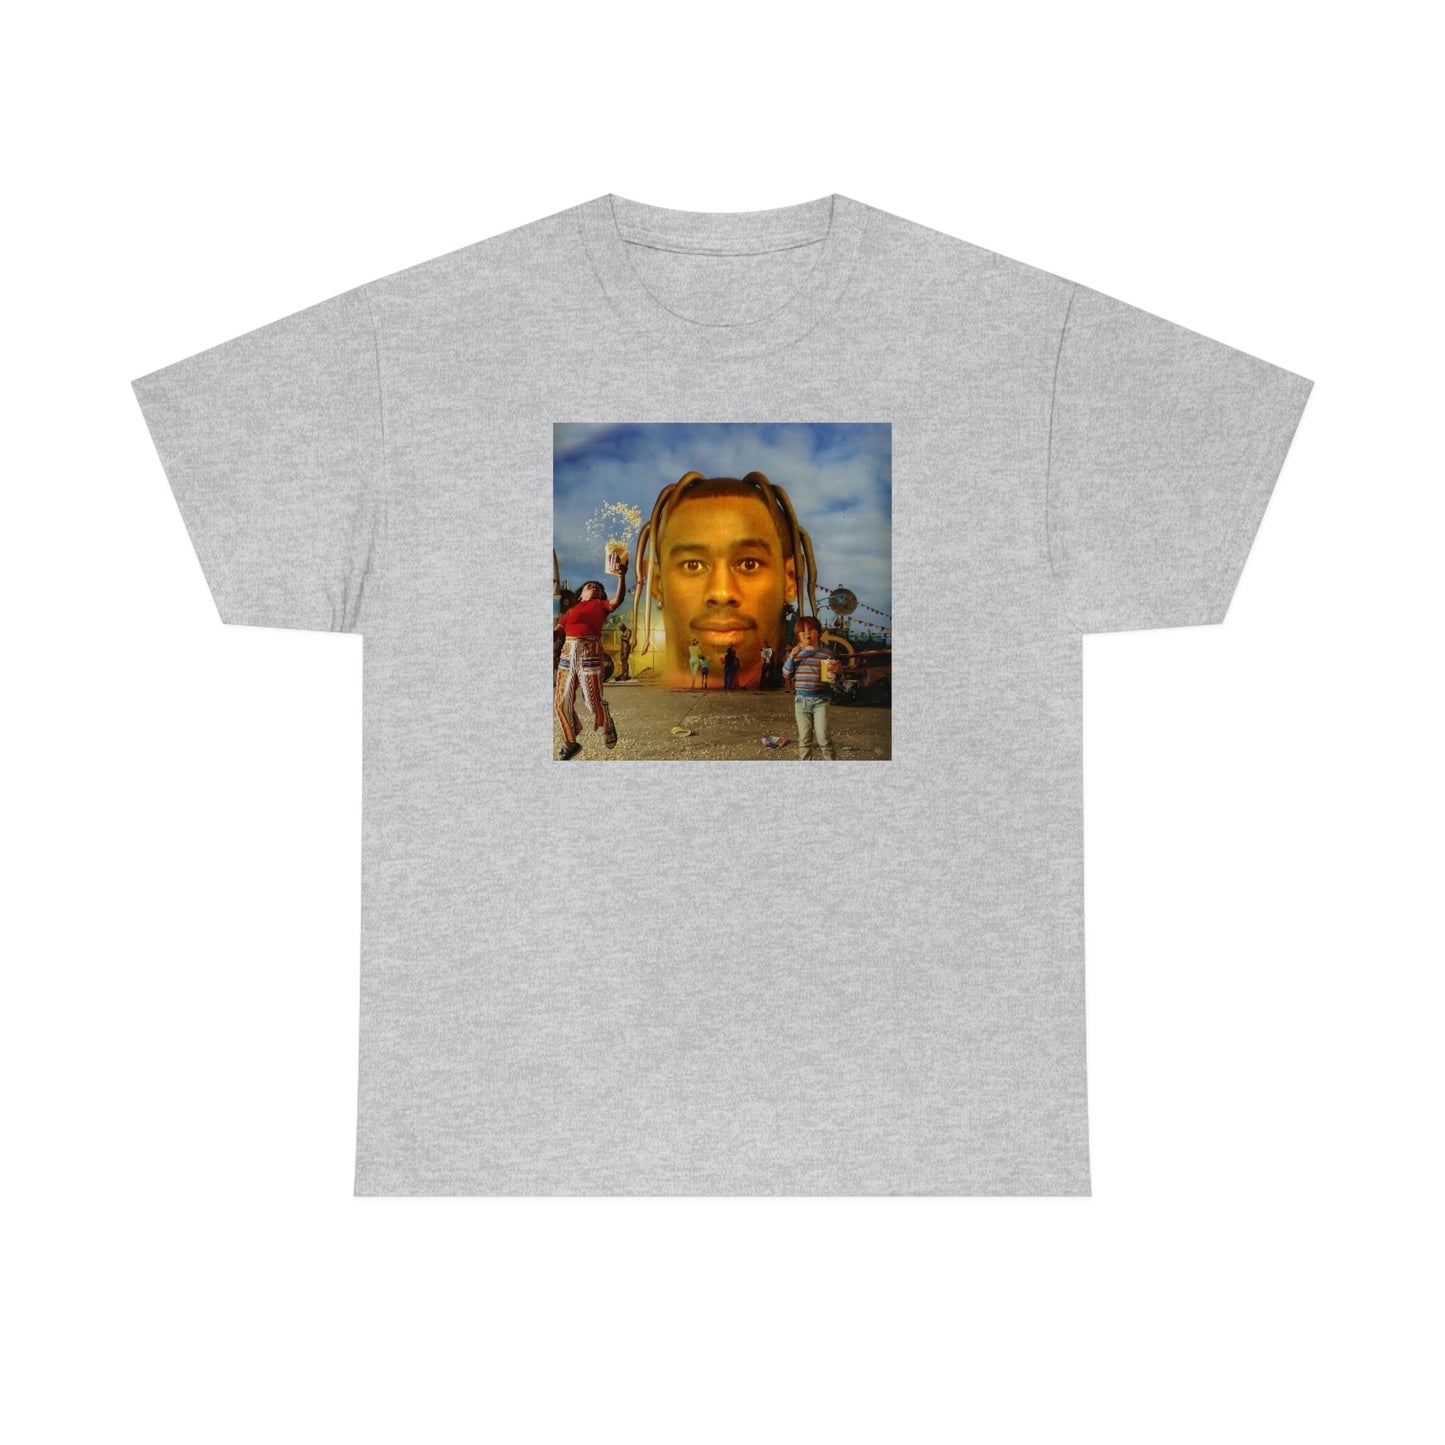 Astro World But Its Tylers Face shirt